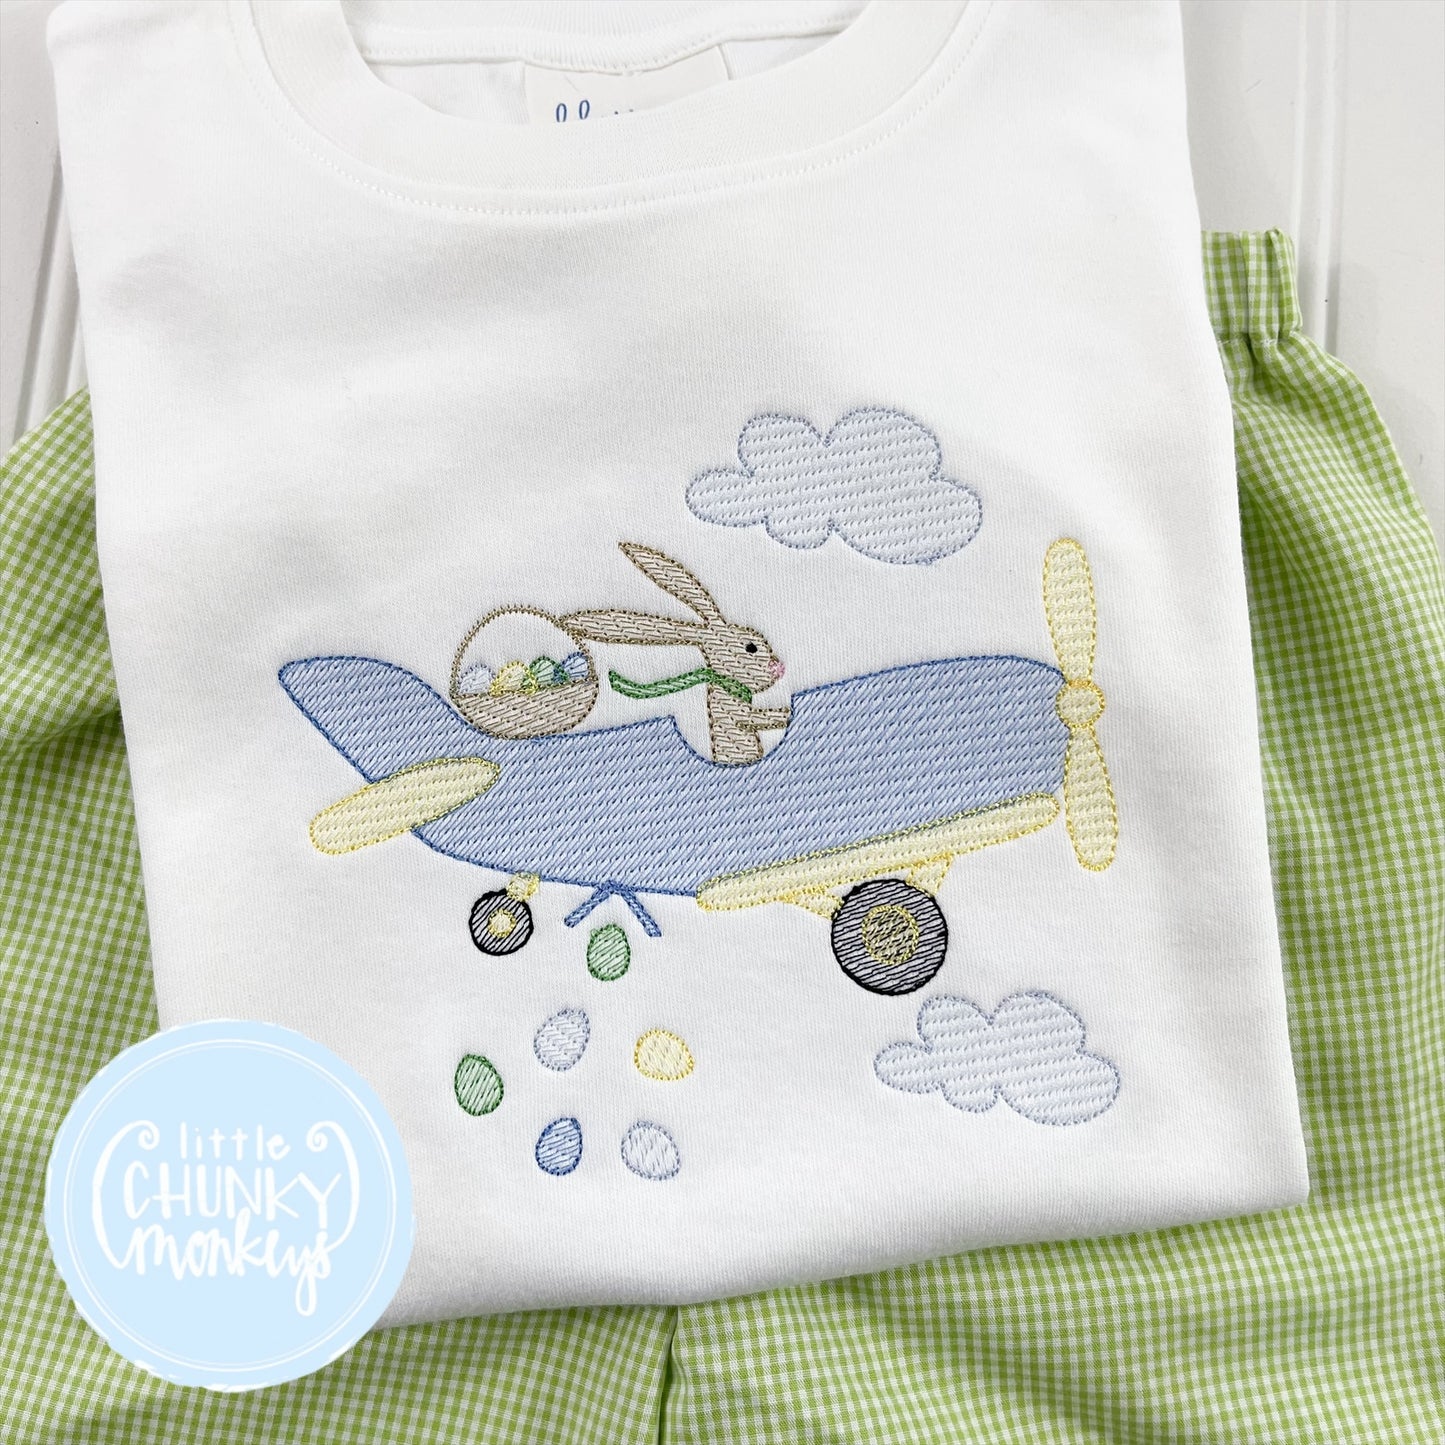 Boy Shirt - Bunny Pilot Delivery